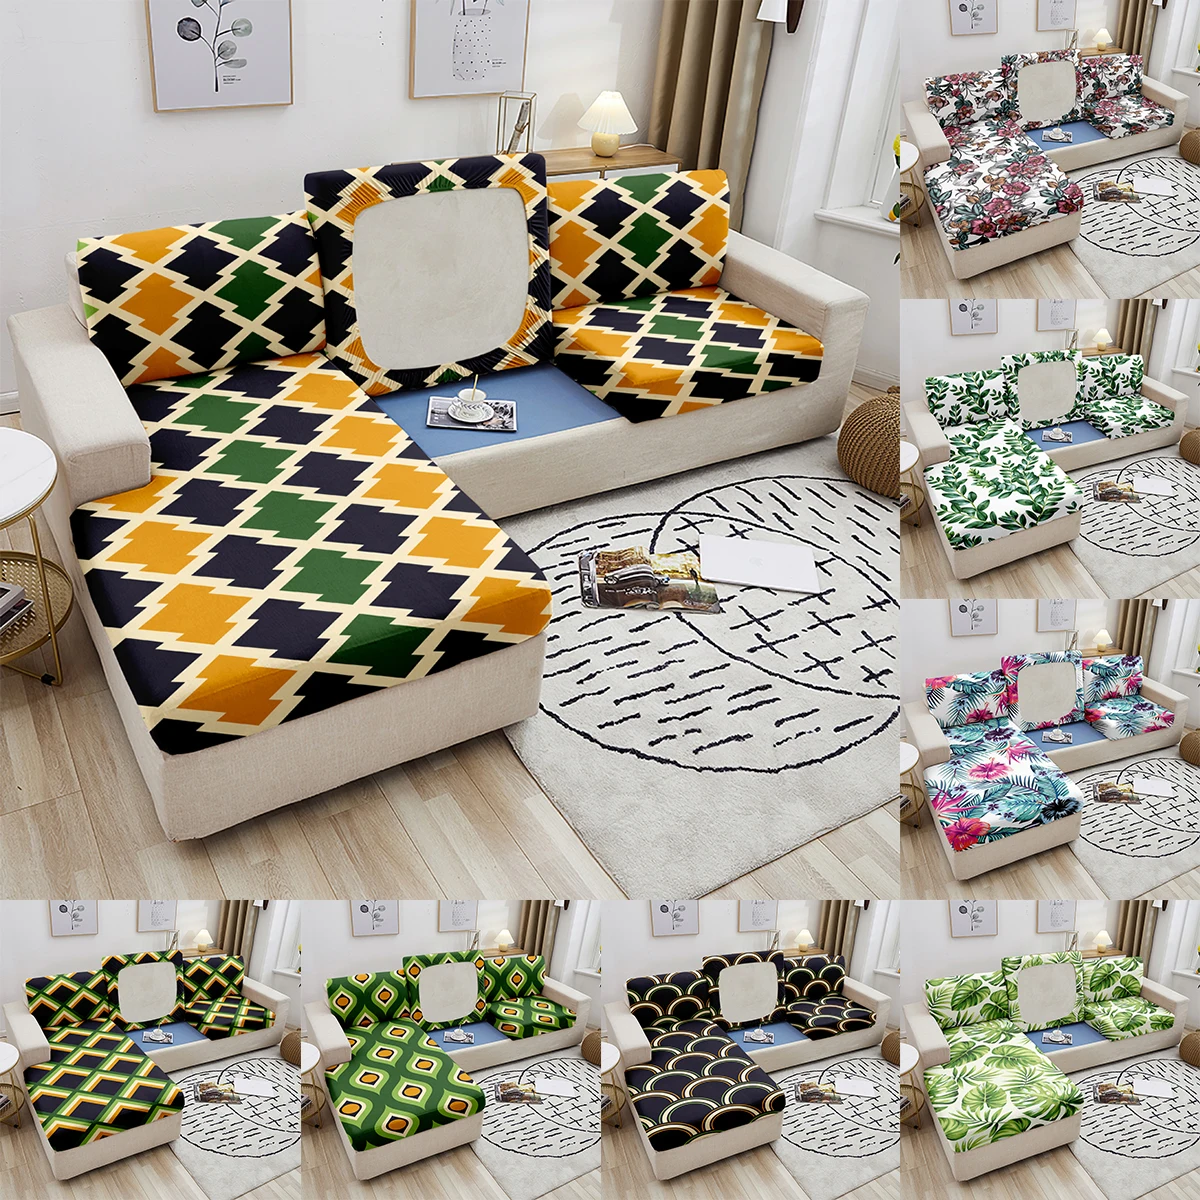 

Geometric Printed Sofa Seat Cushion Cover Elastic Sofa Seater Case for Living Room Stretch Green Grid Couch Cover 1/2/3/4 Seater